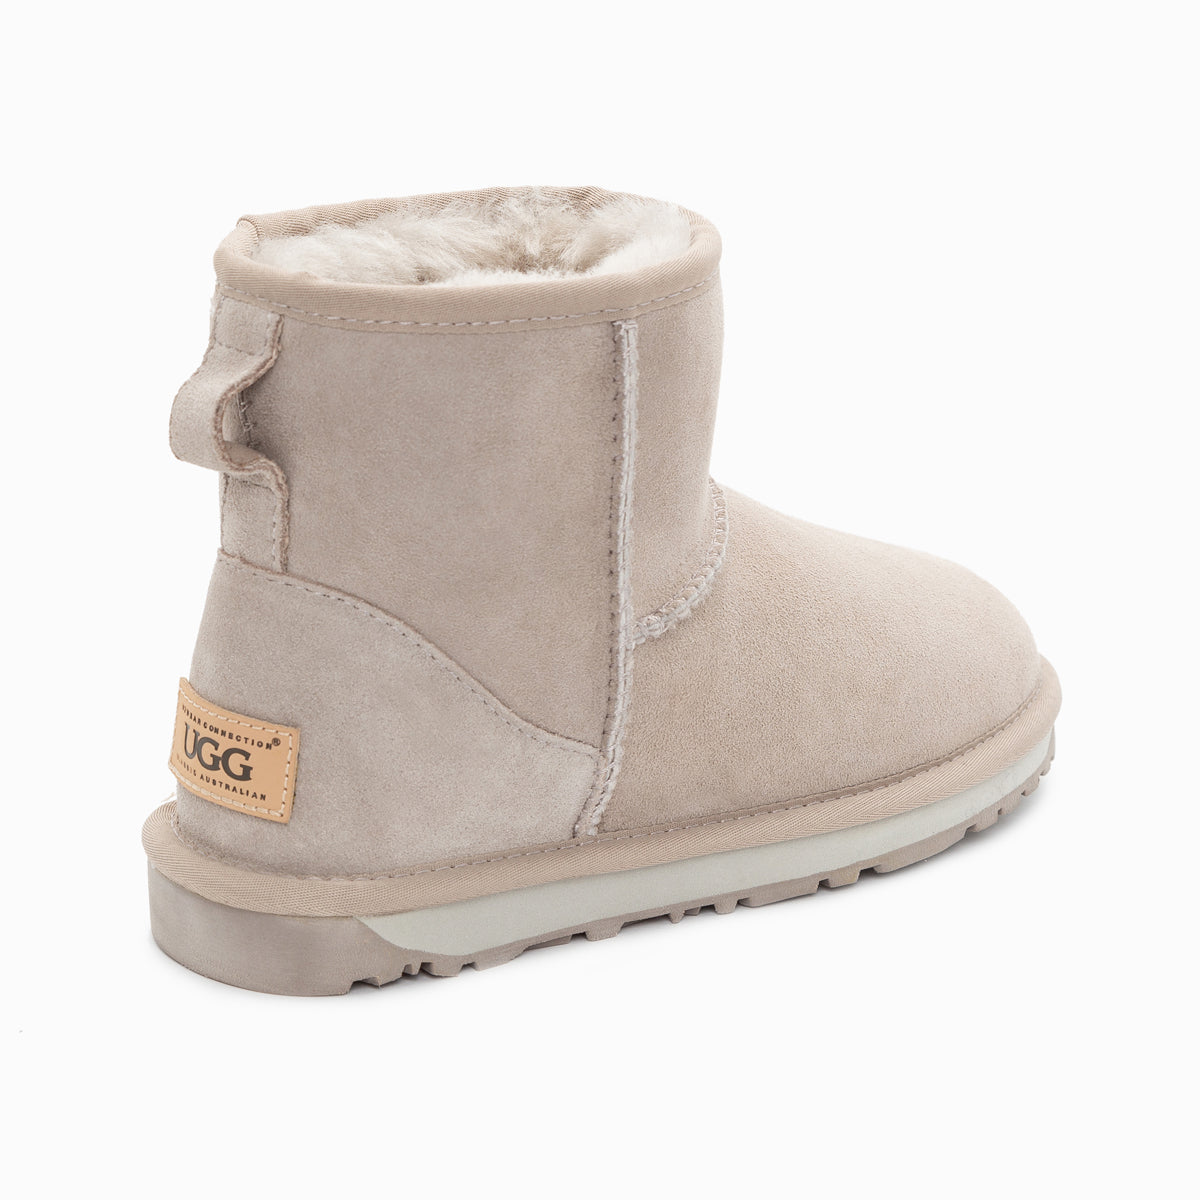 Ugg Classic Mini Boots (Water Resistant) | OZWEAR UGG